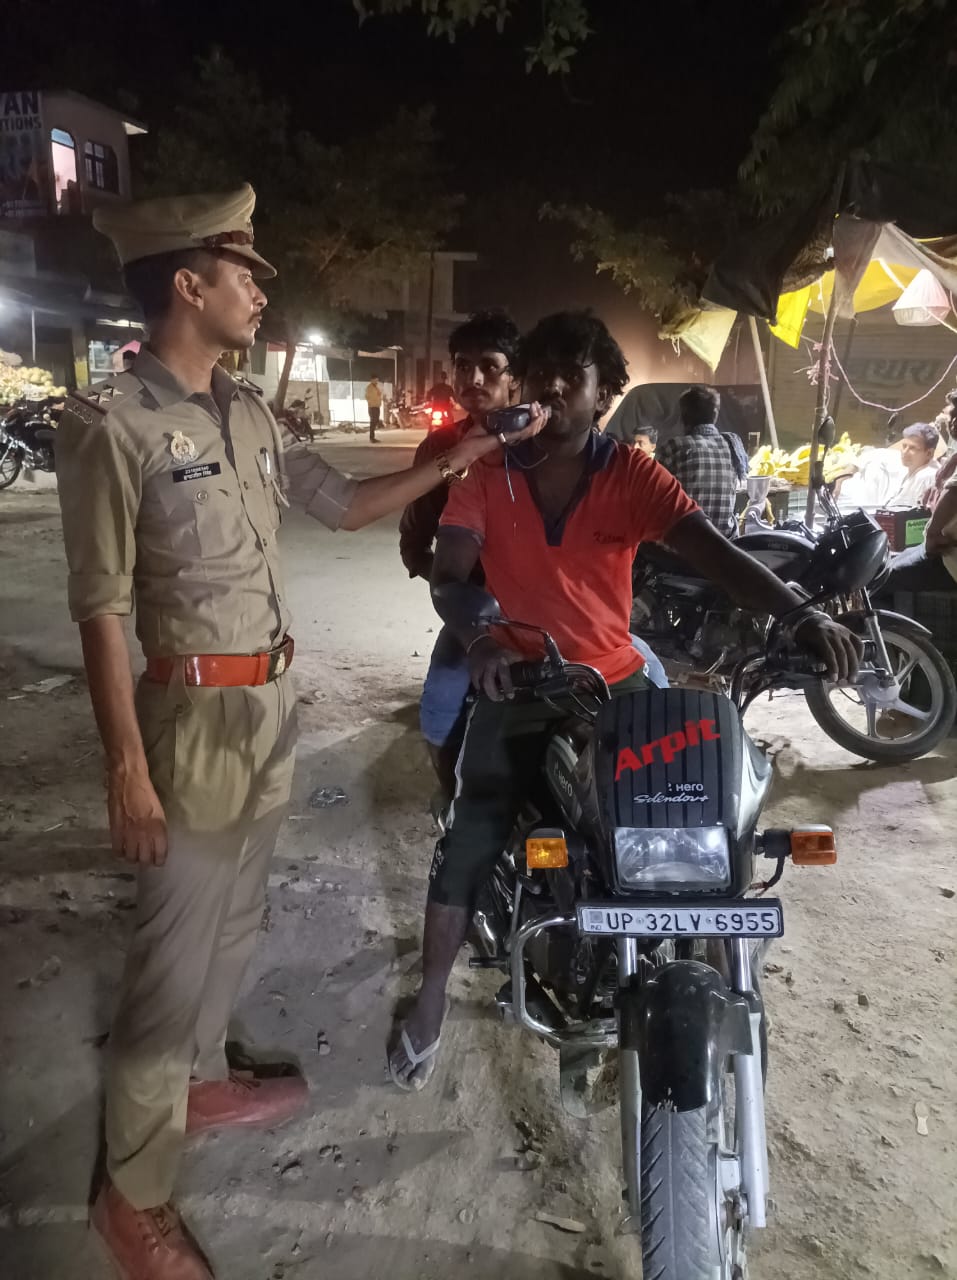 An effective checking campaign was conducted against people drinking alcohol in the open